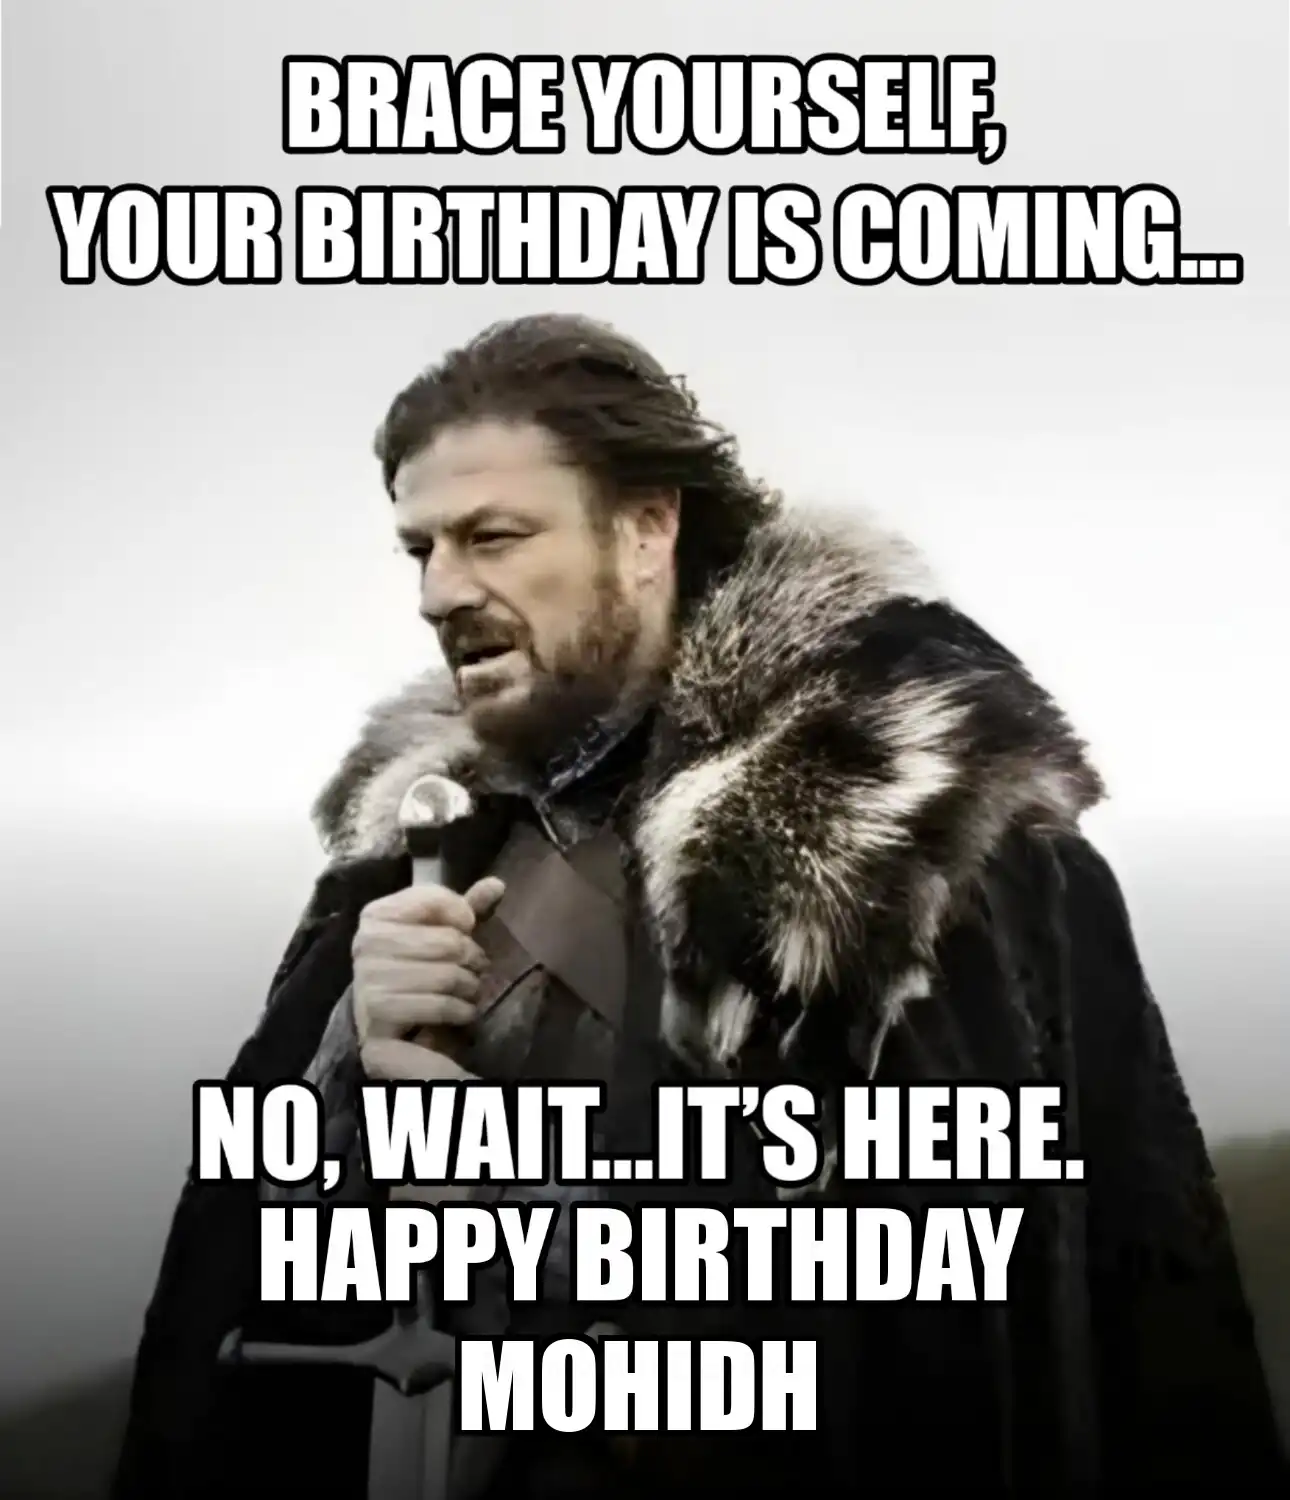 Happy Birthday Mohidh Brace Yourself Your Birthday Is Coming Meme